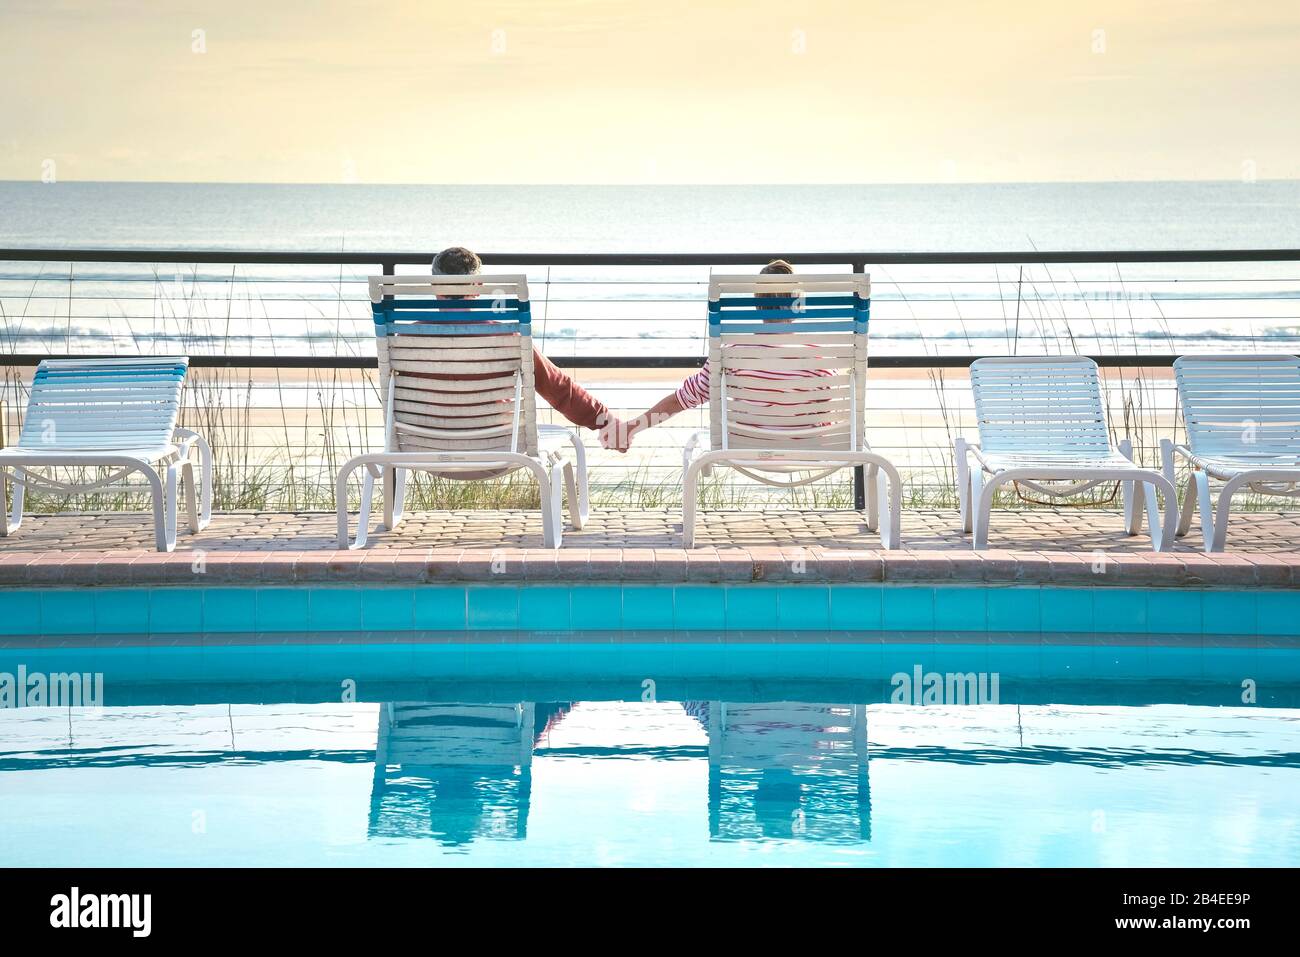 USA, Folrida, Daytona Beach, couple in beach chairs by the pool, holding hands, overlooking the sea Stock Photo